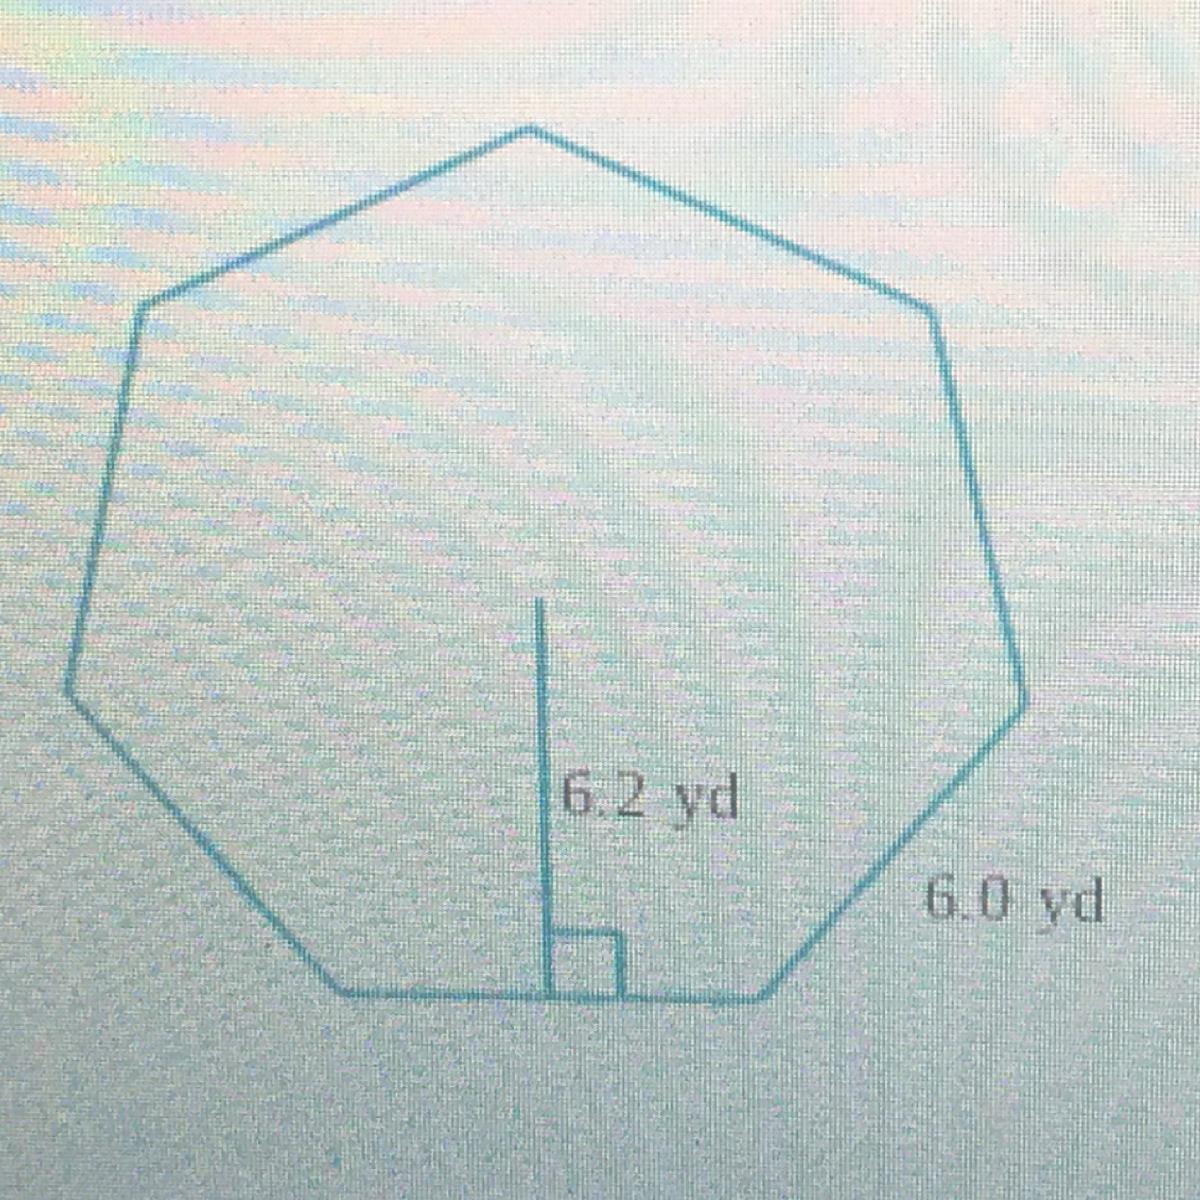 A Regular Heptagon Has A Side Of Approximately 6.0 Yd And An Apothem Of Approximately 6.2 Yd.Find The